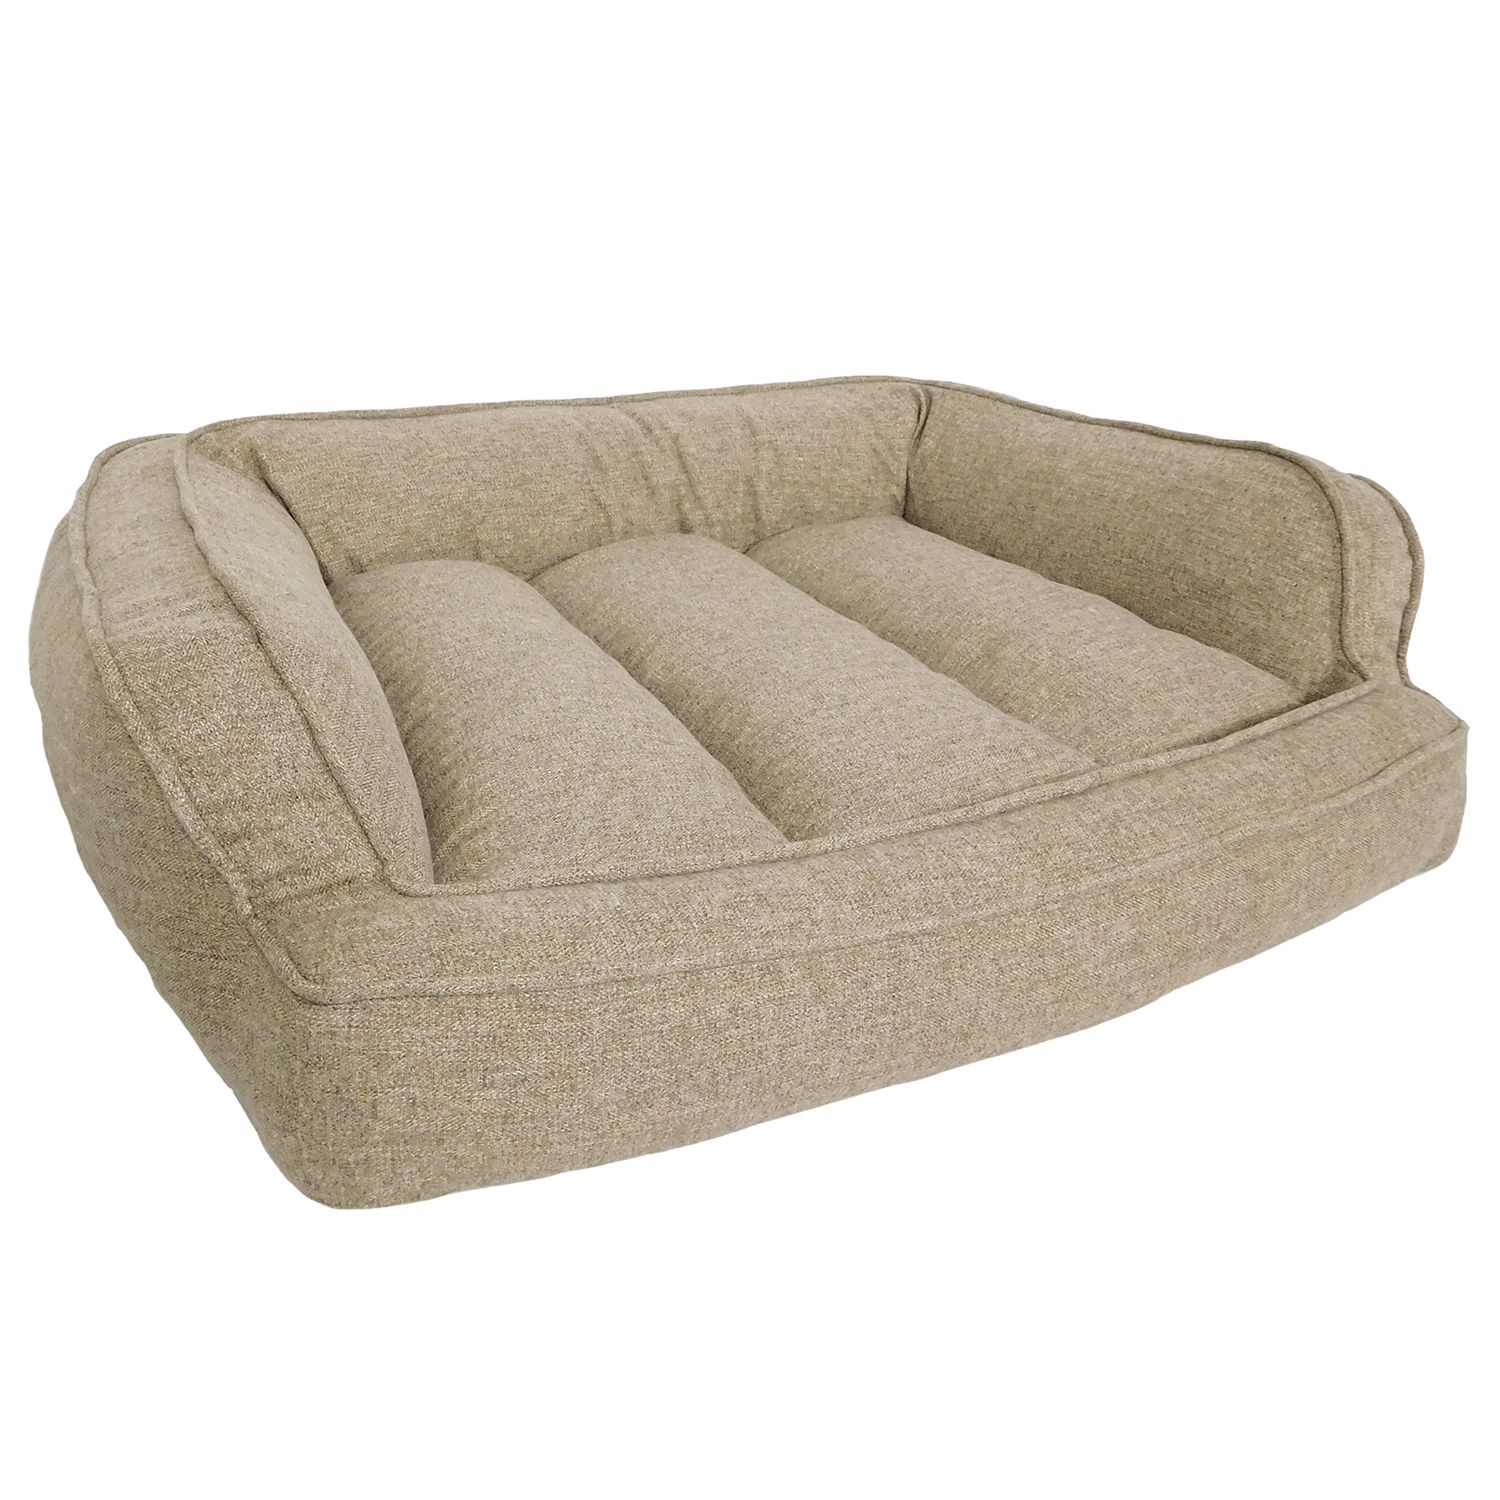 couch pet bed